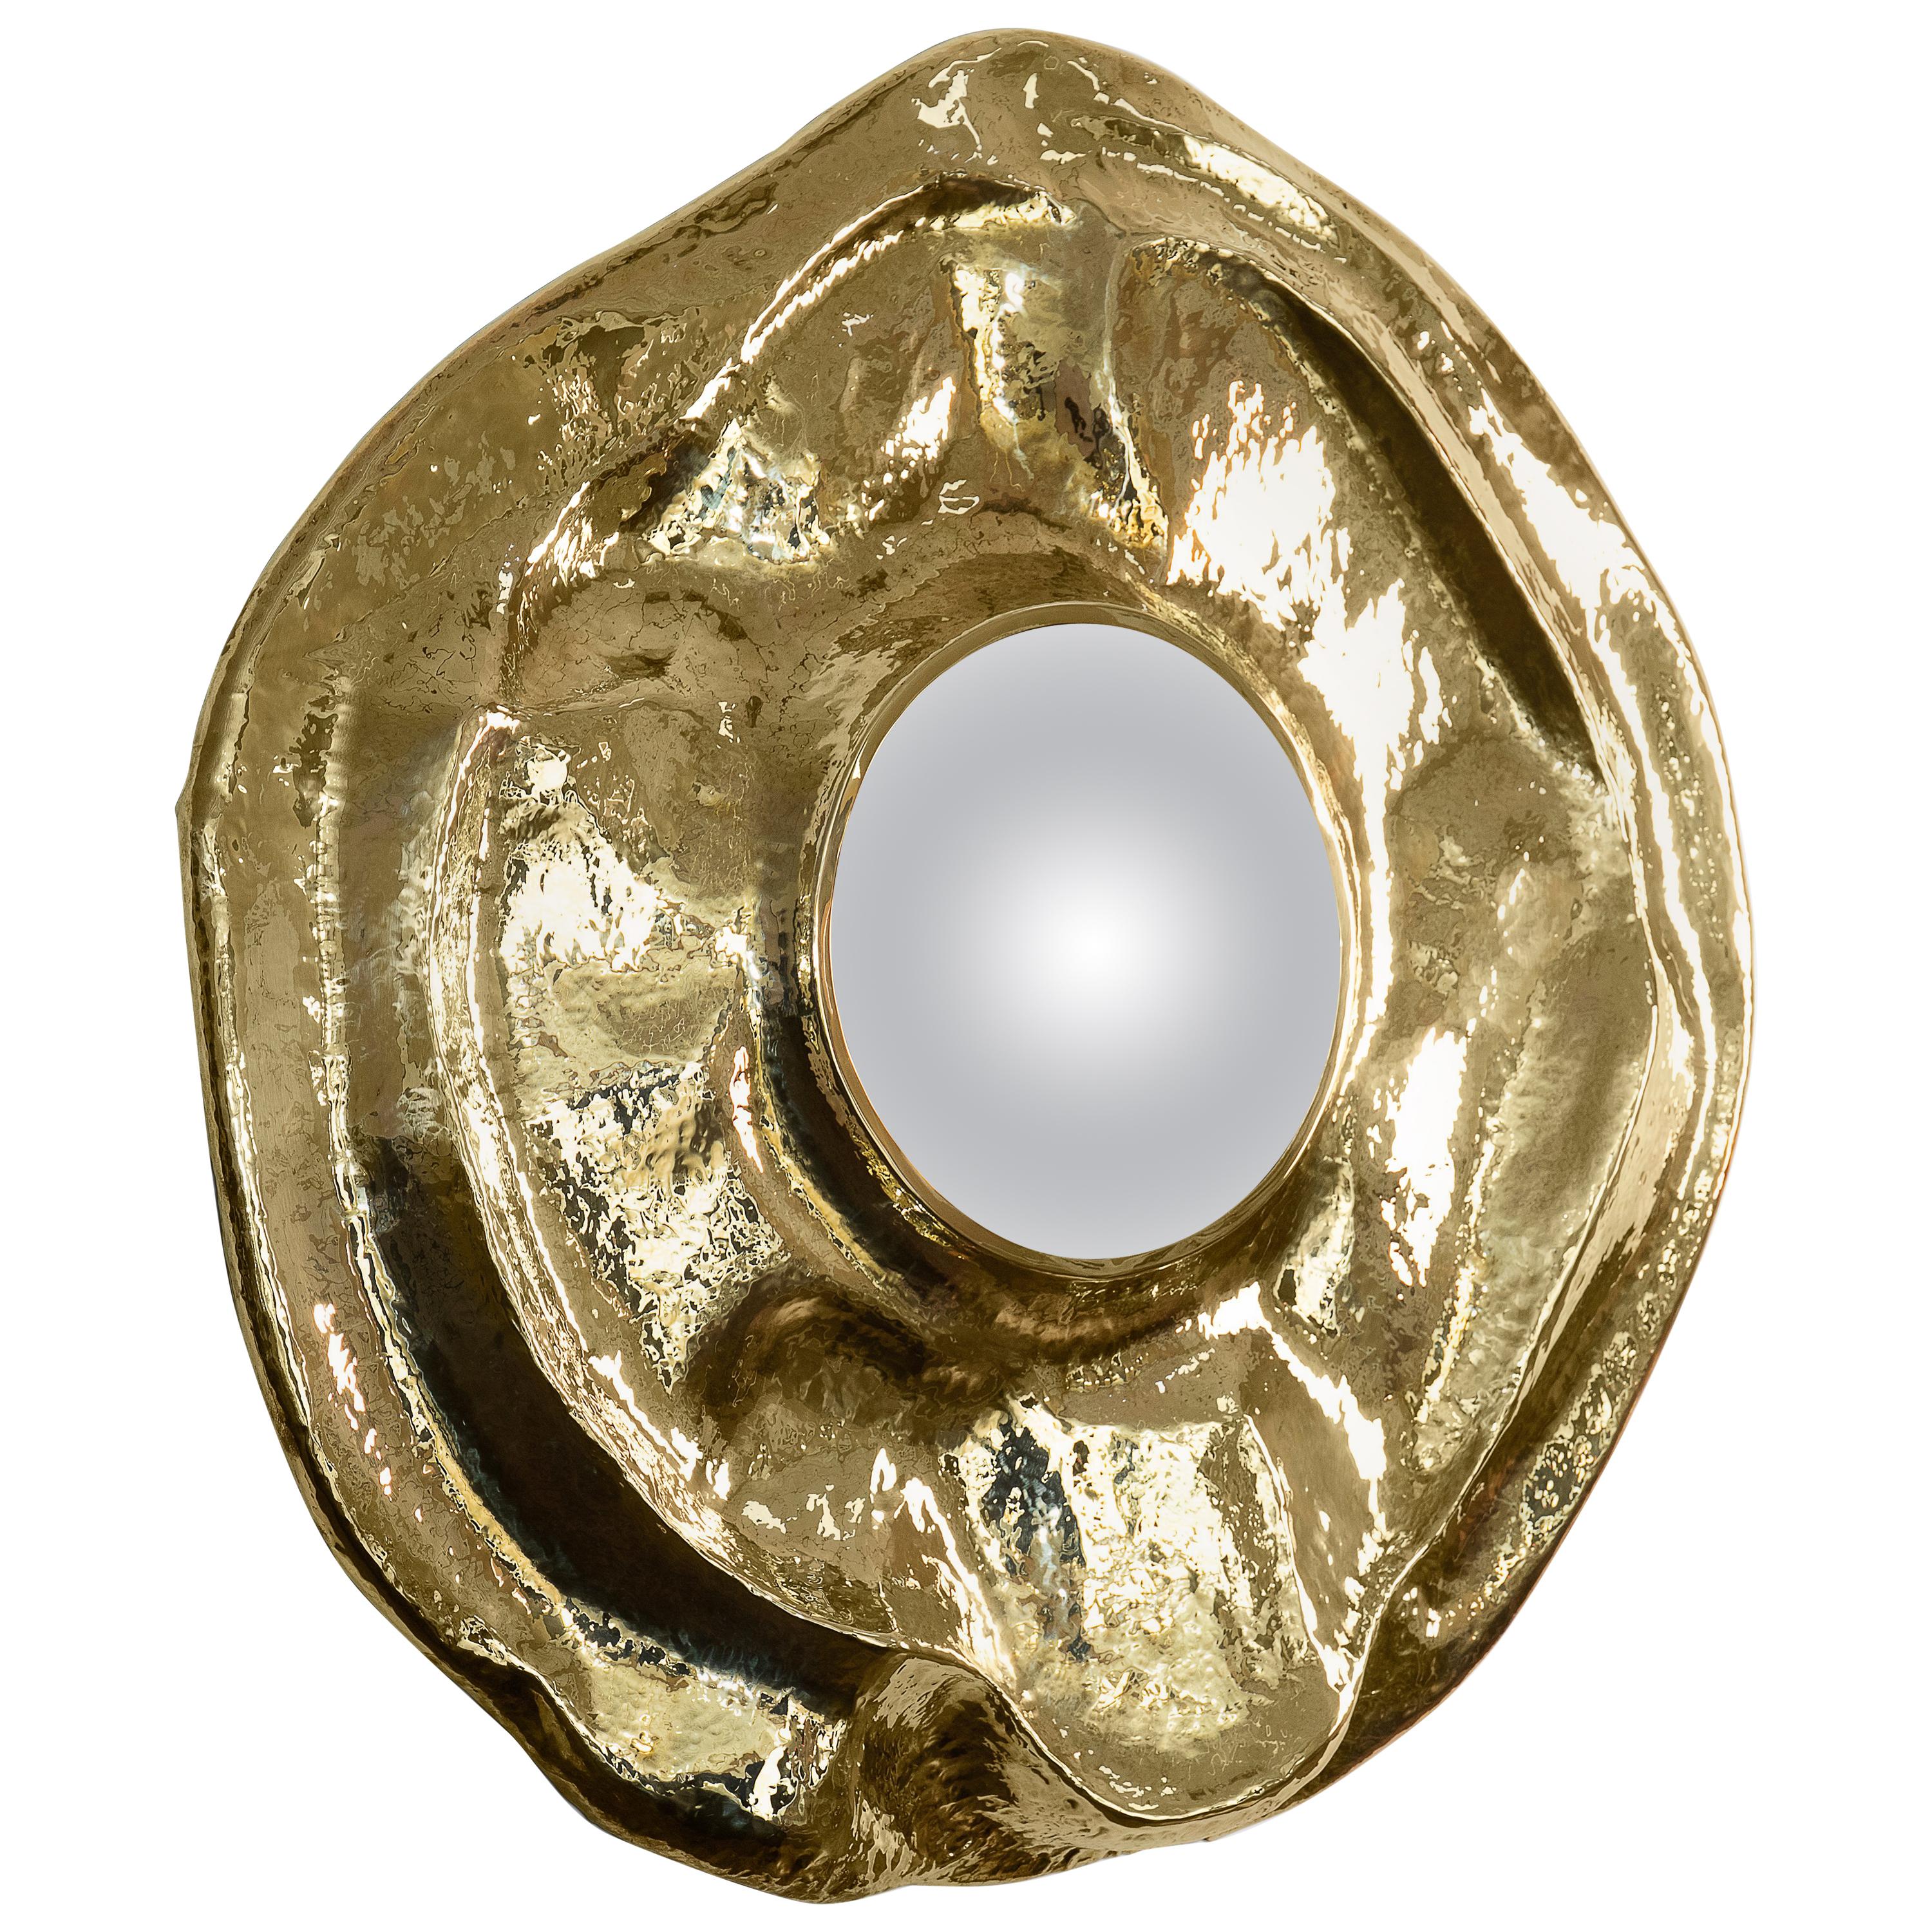 This large wall mirror offers a tribute to the historical city of Angra do Heroísmo in Azores, Portugal. The seductive and elegant mirror, it's outstanding in its shape and curved design. The polished brass creates a superb accent providing a